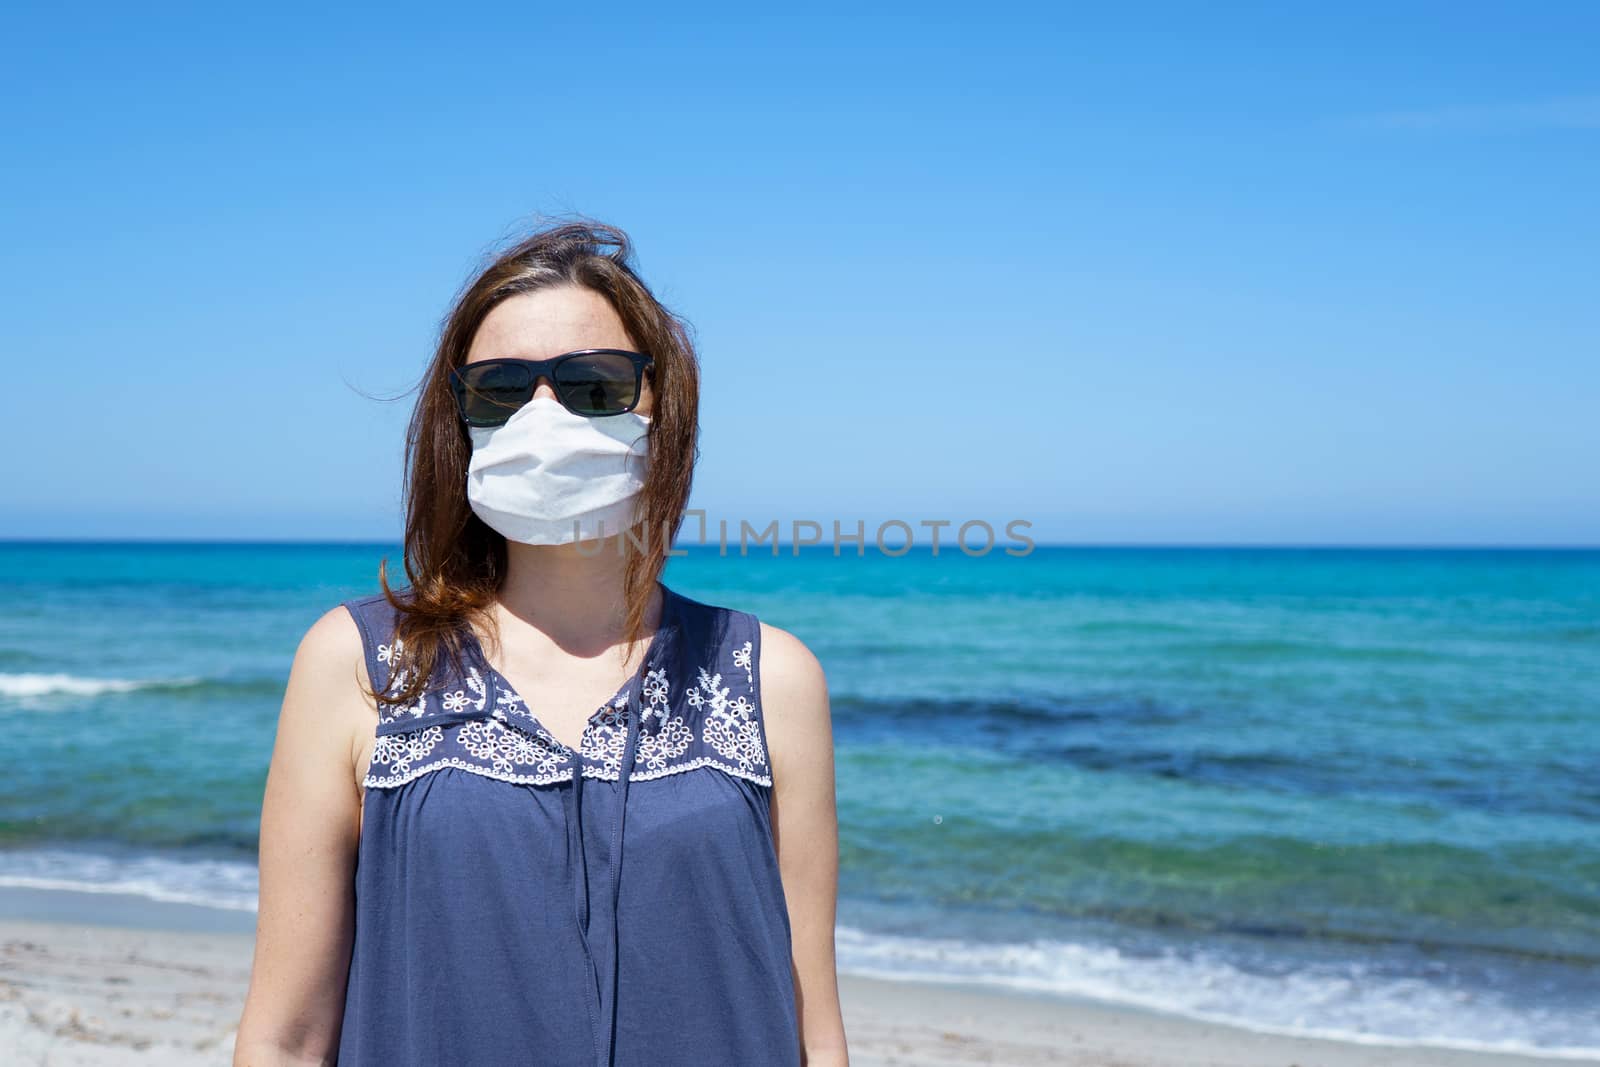 Coronavirus seaside holidays: a woman standing on the sand at the beach looking at the sun with the mask for Covid-19 pandemic